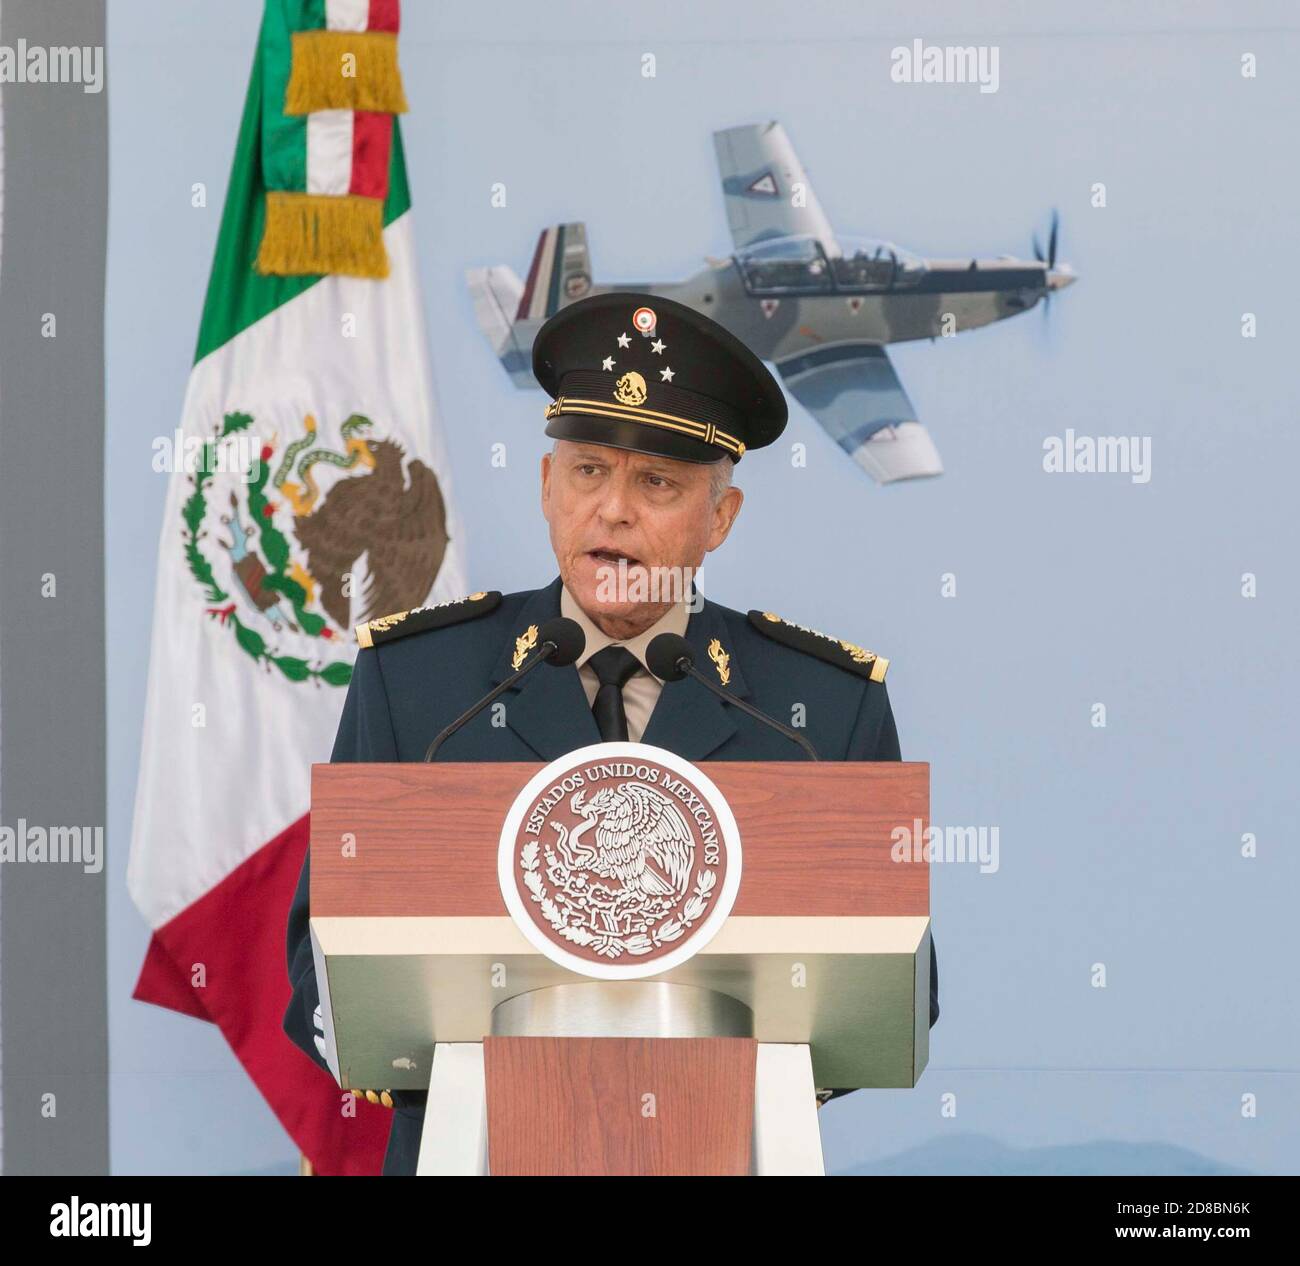 Mexican Defense Minister Gen. Salvador Cienfuegos Zepeda delivers an address during a promotion ceremony July 26, 2017 in Mexico City, Mexico. Cienfuegos was arrested October 16, 2020 at Los Angeles International Airport and charged with drug-related corruption. Stock Photo